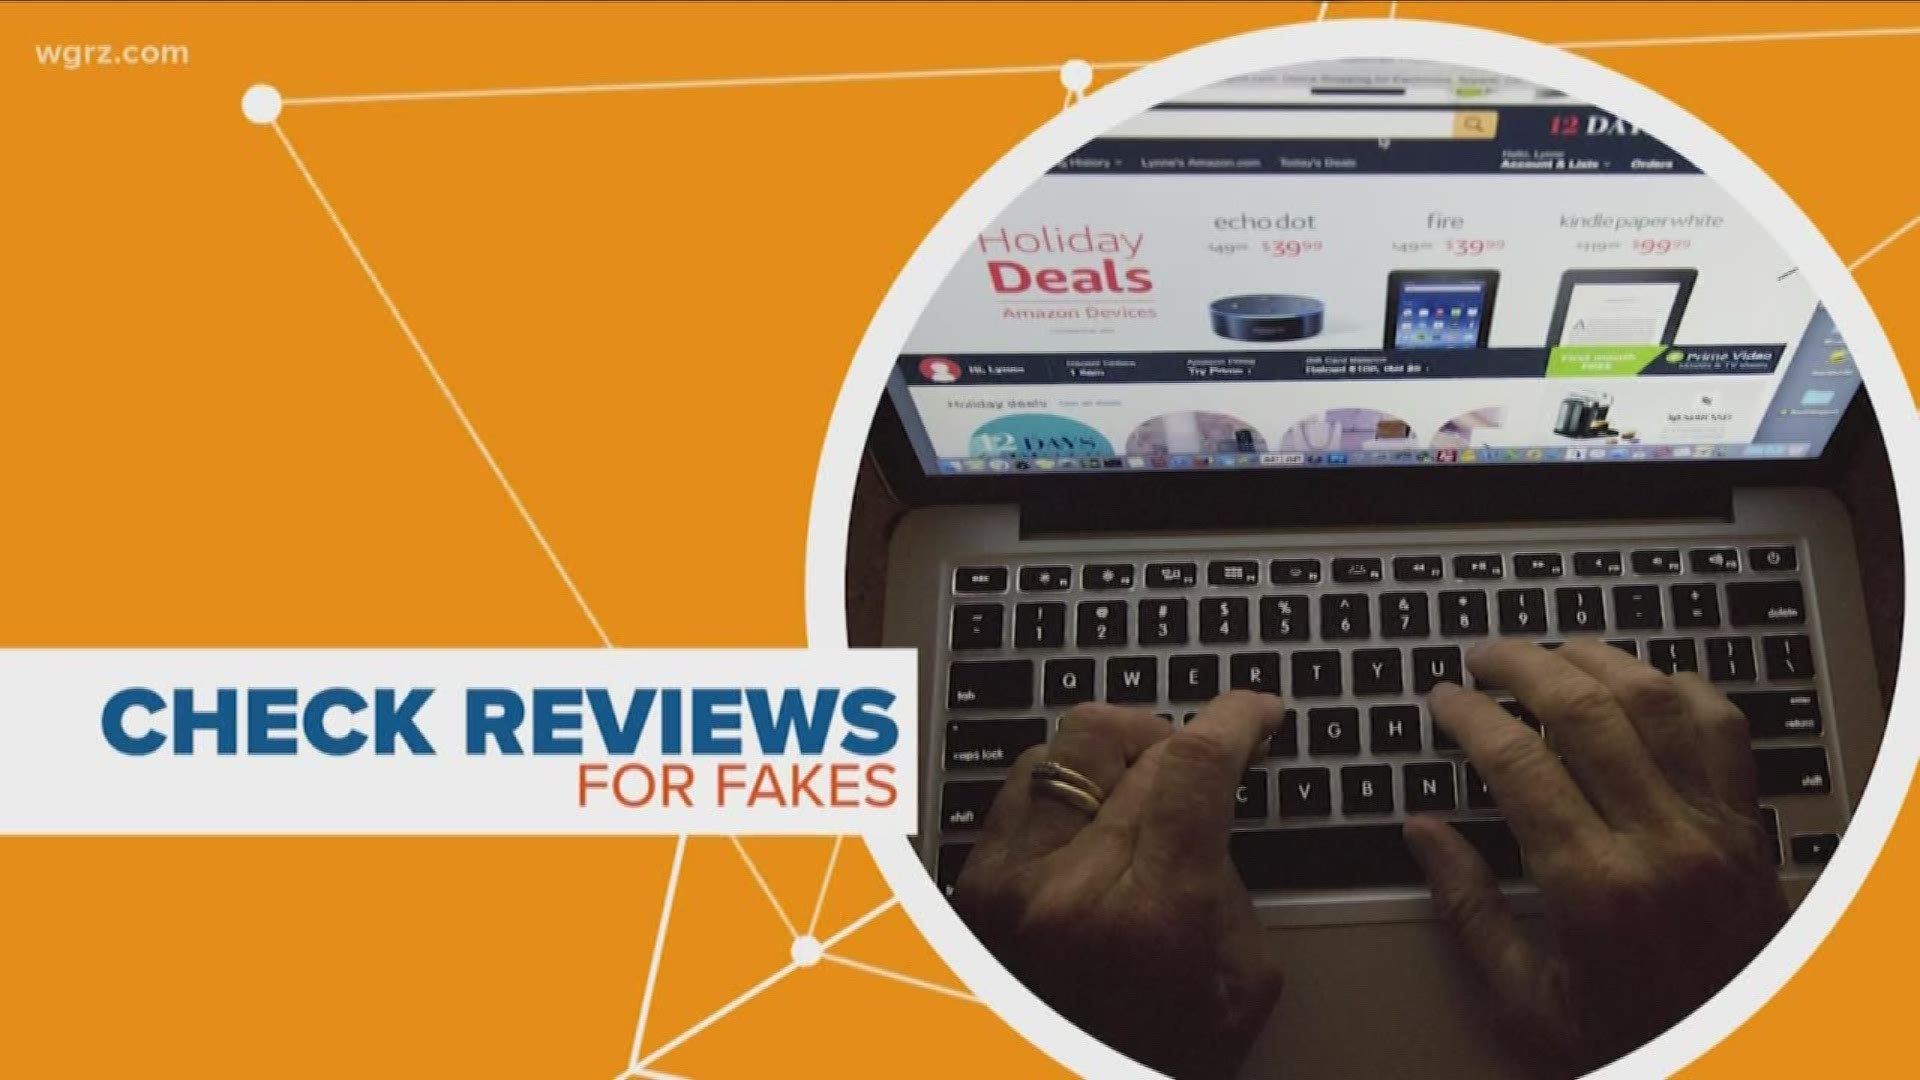 A recent study found about one third of all amazon reviews are fake.